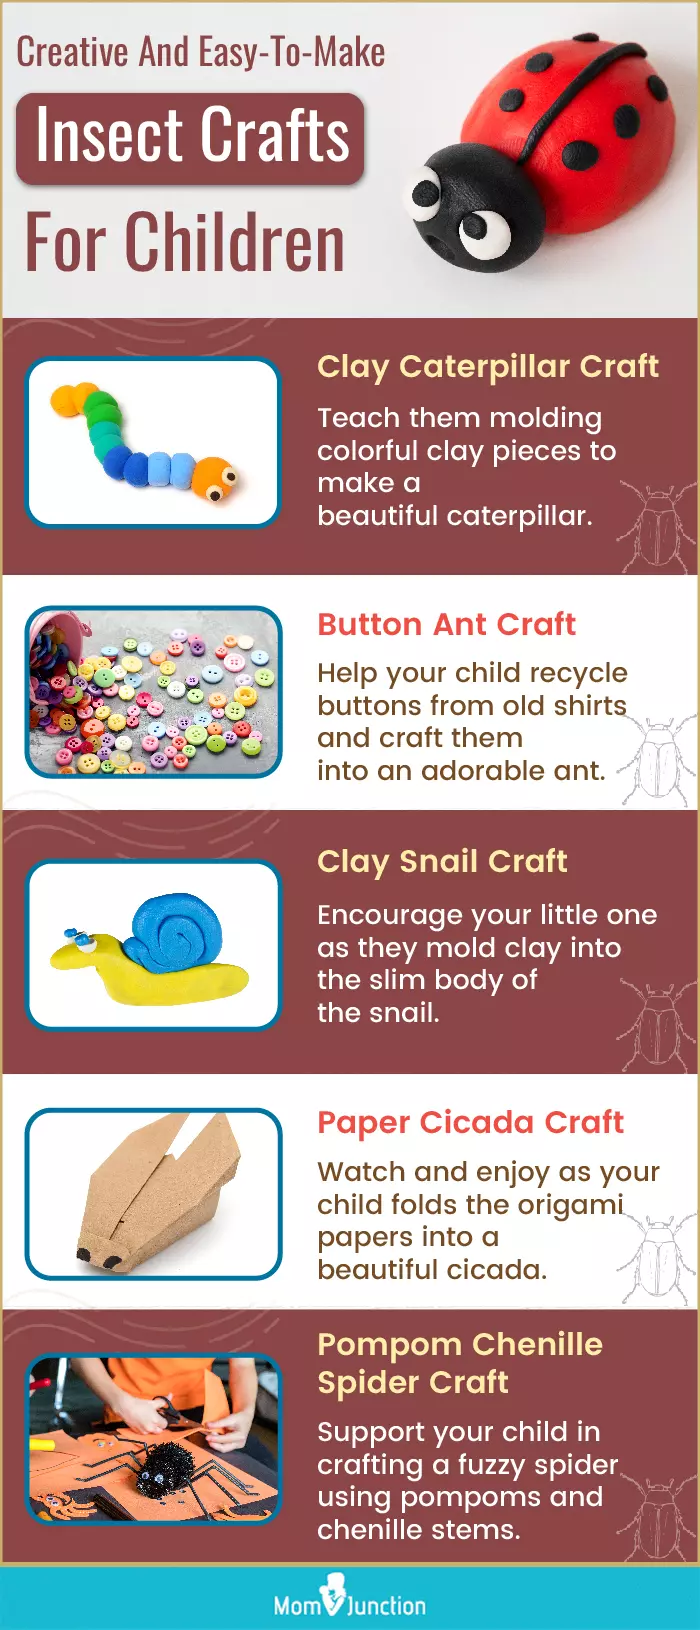 creative and easy to make insect crafts for children (infographic)